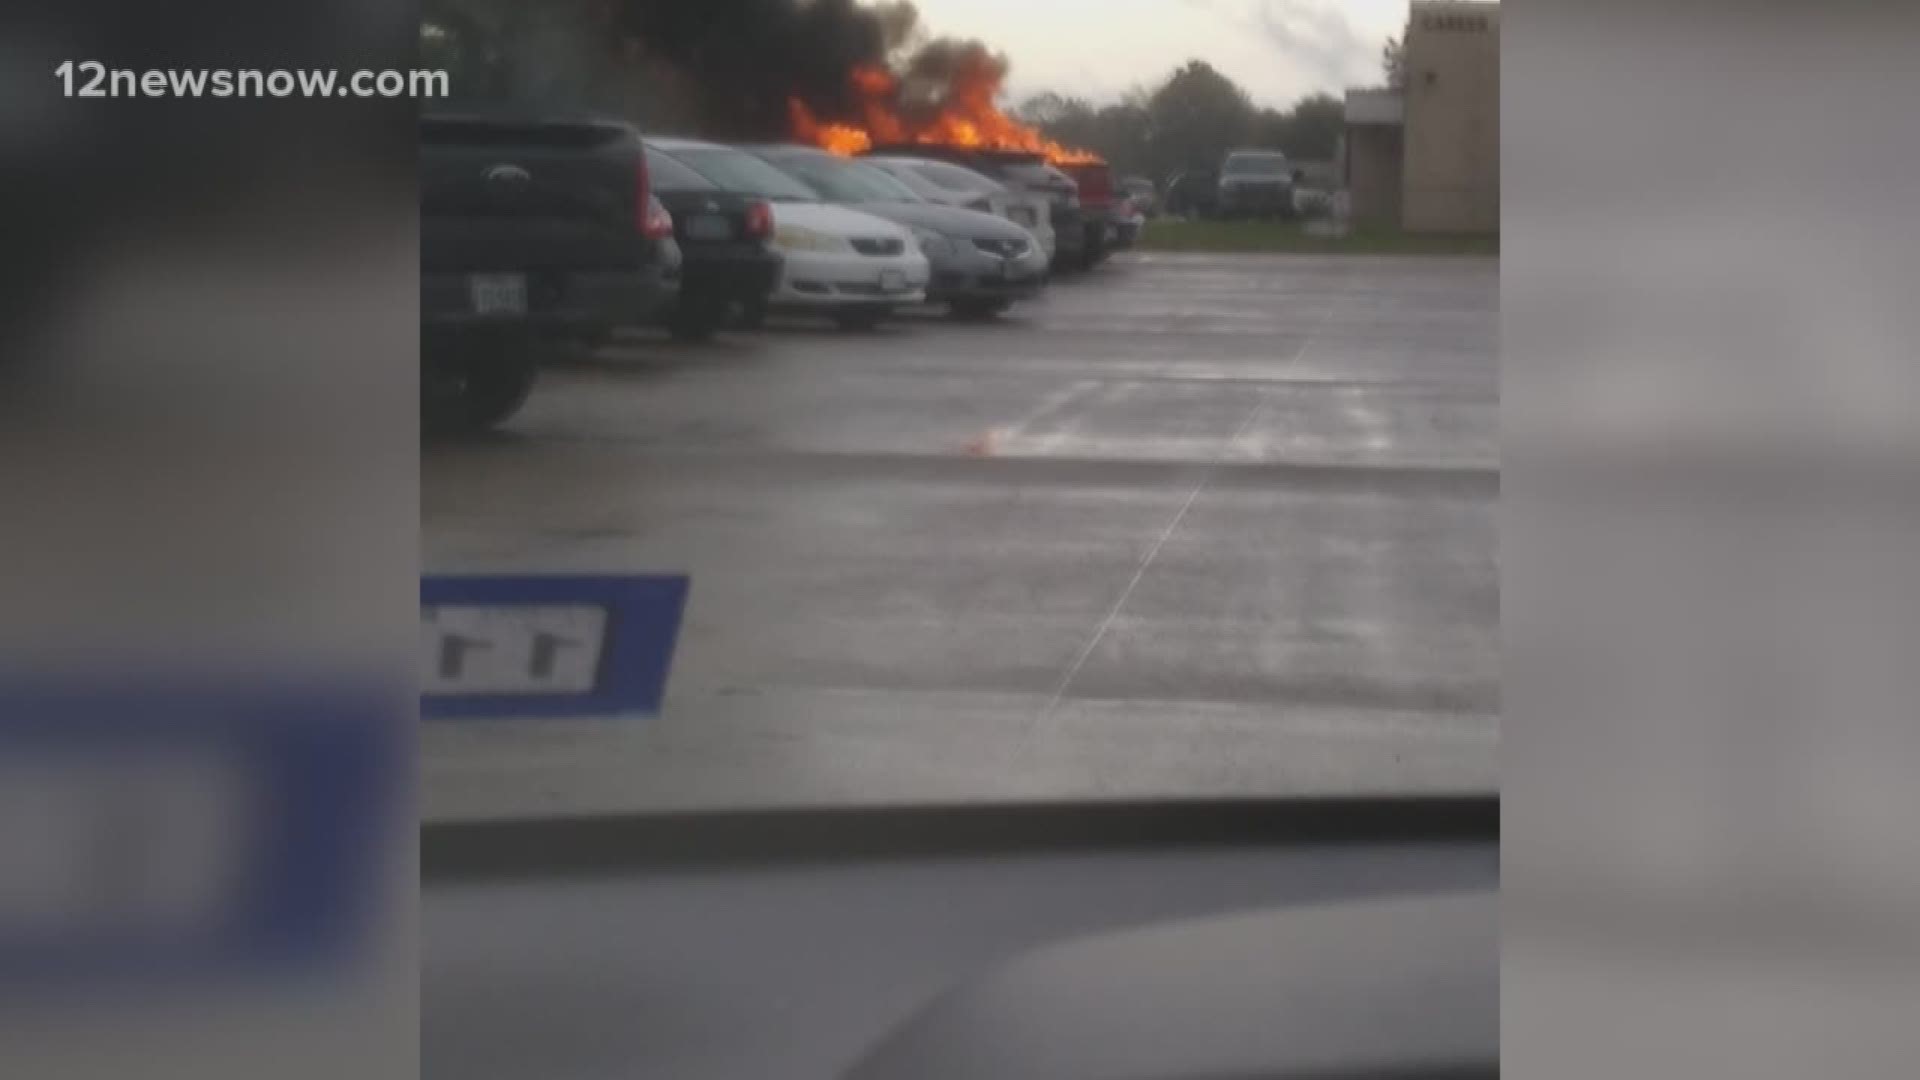 Flames could be seen above the vehicles on Wednesday morning